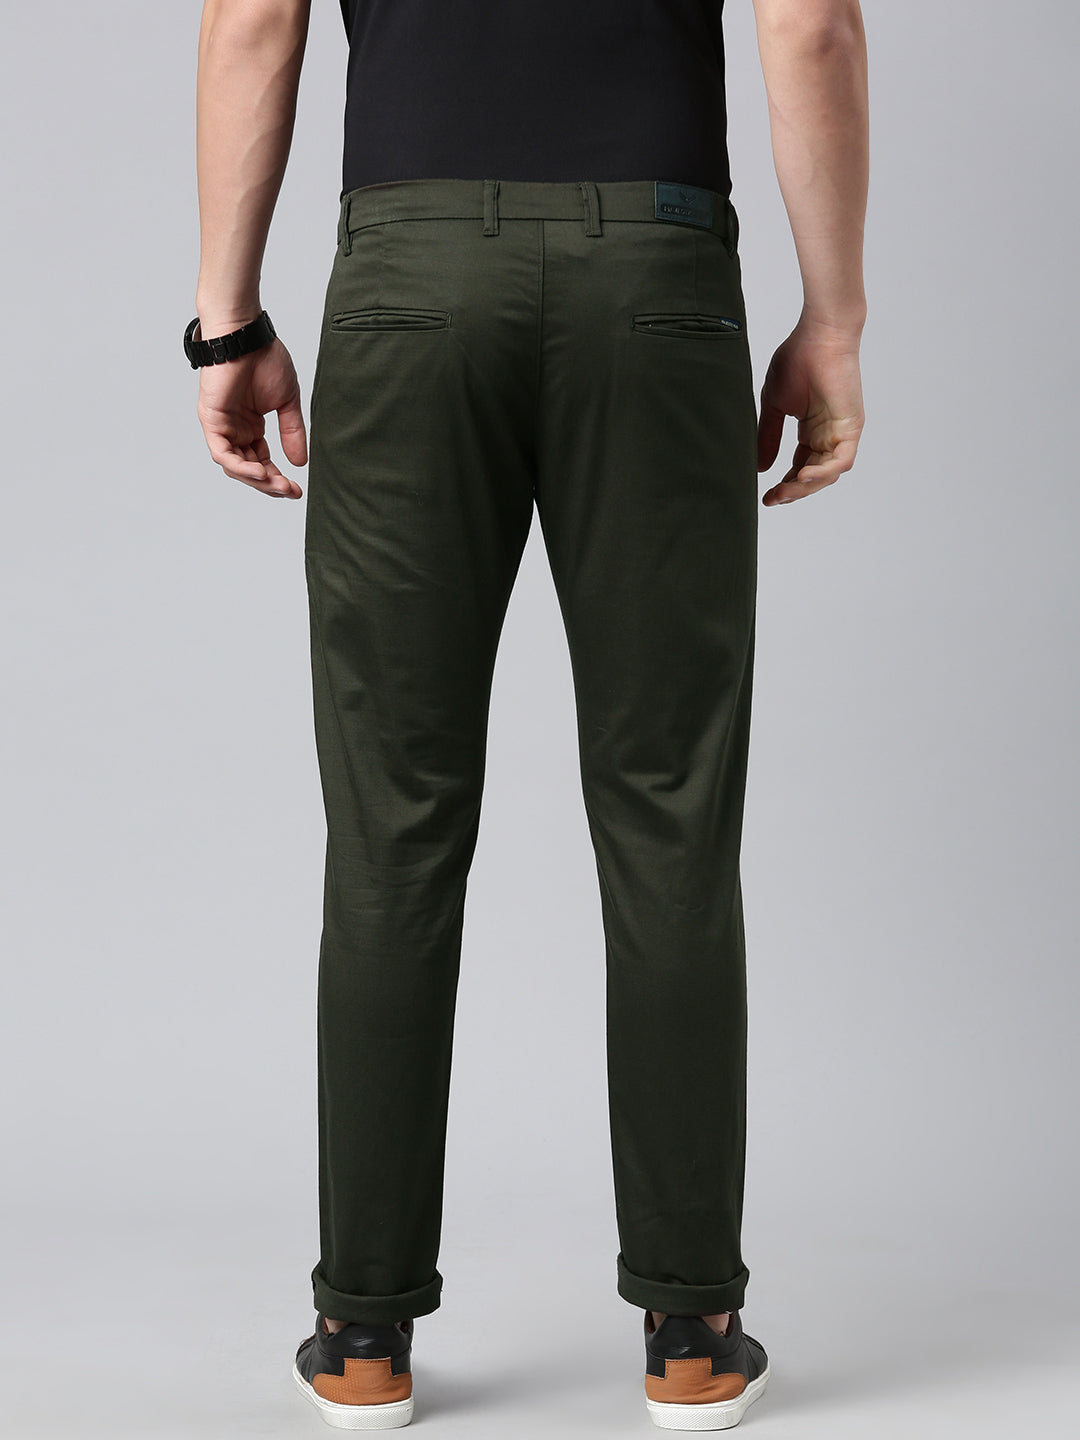 Classic Men's Trousers for Effortless Style - Olive